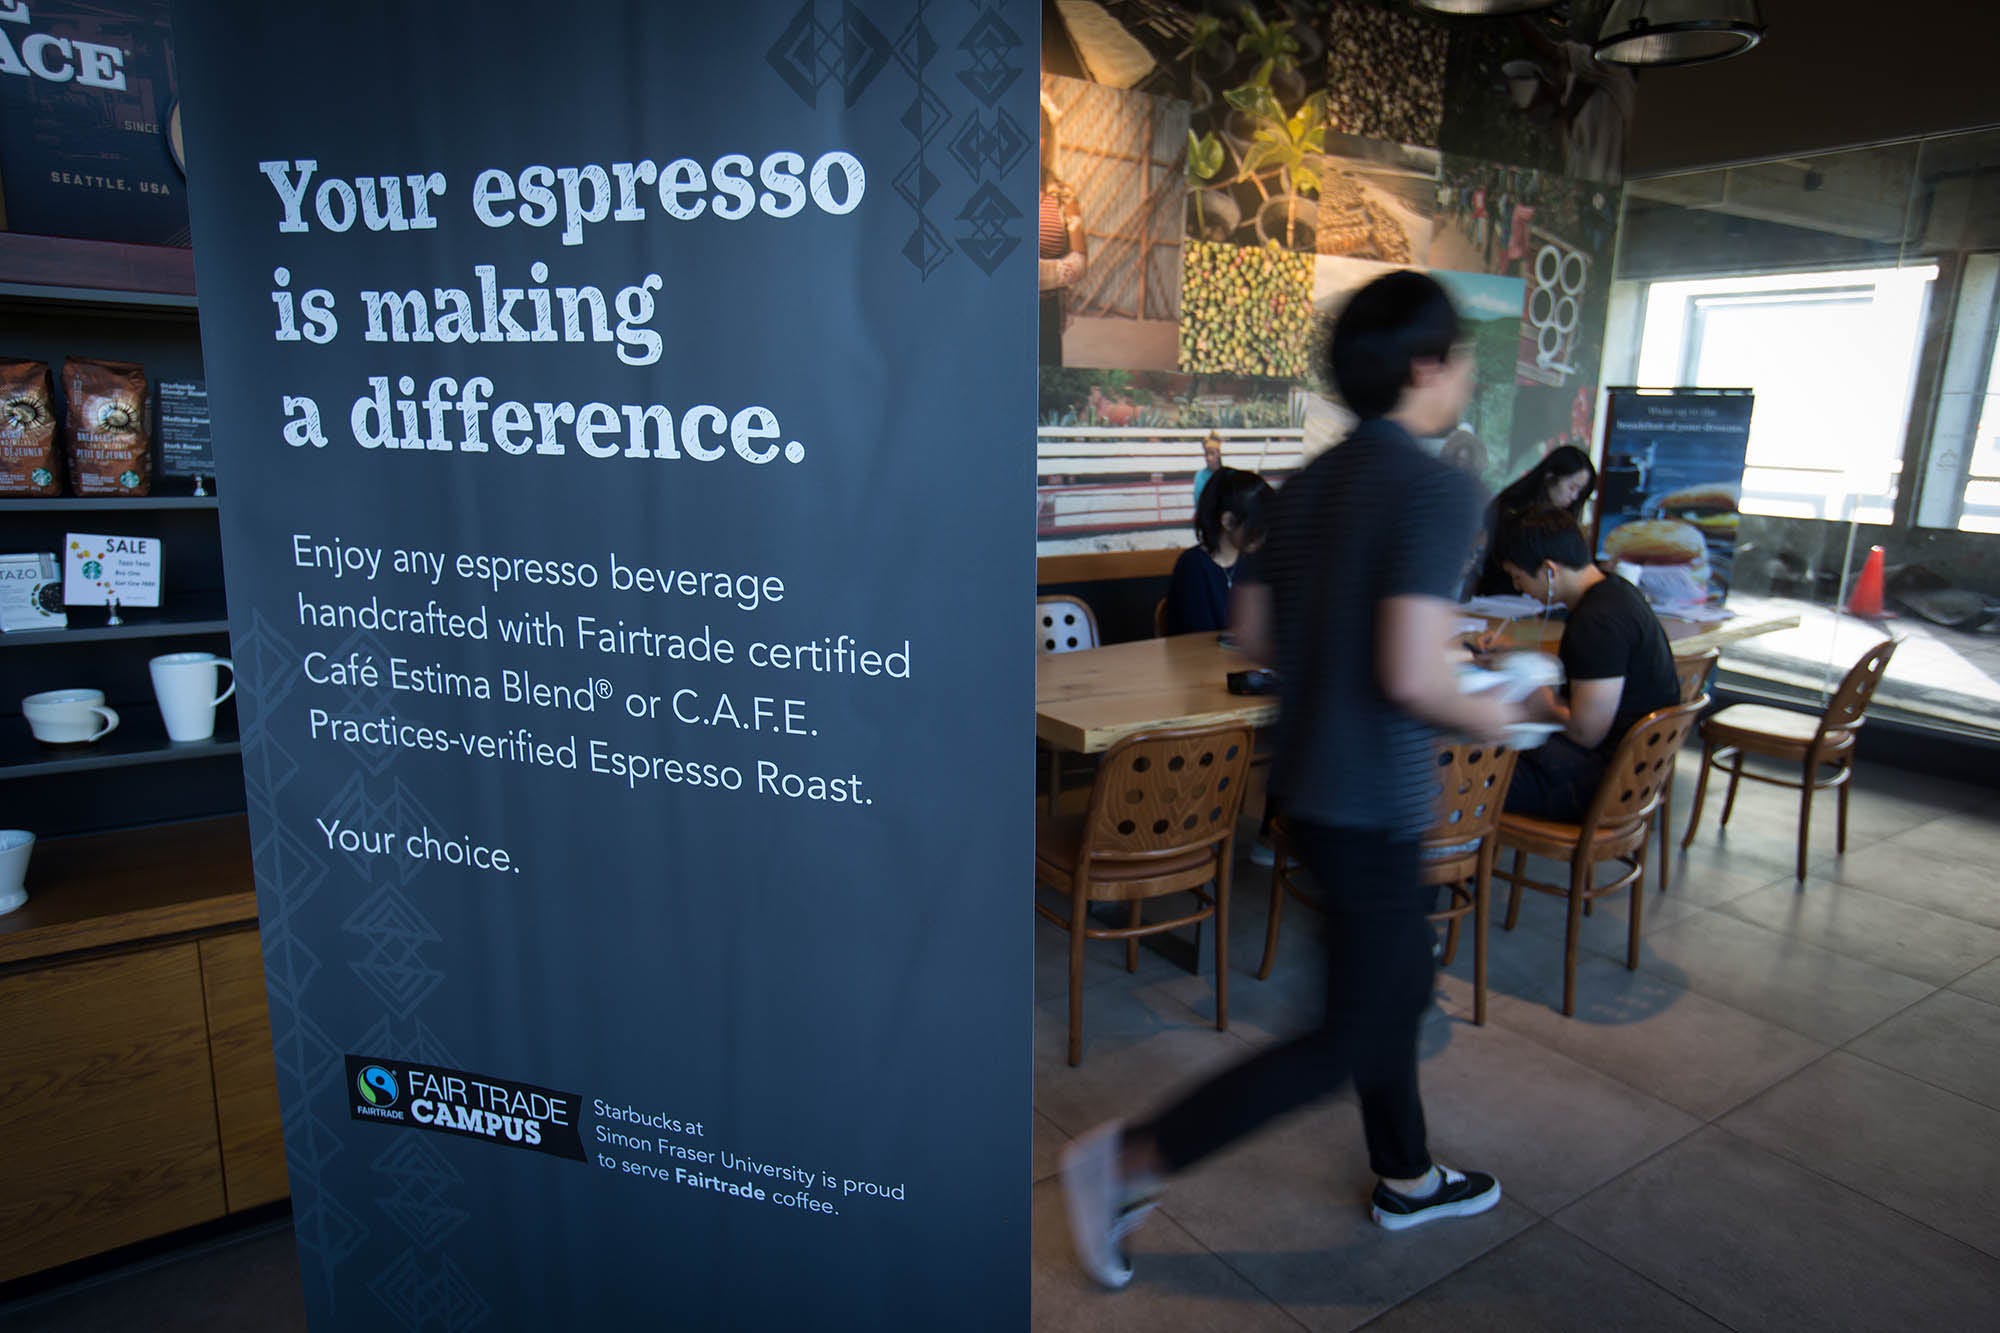 Inside the Thriving World of Starbucks Reusable Cup Collectors - Eater